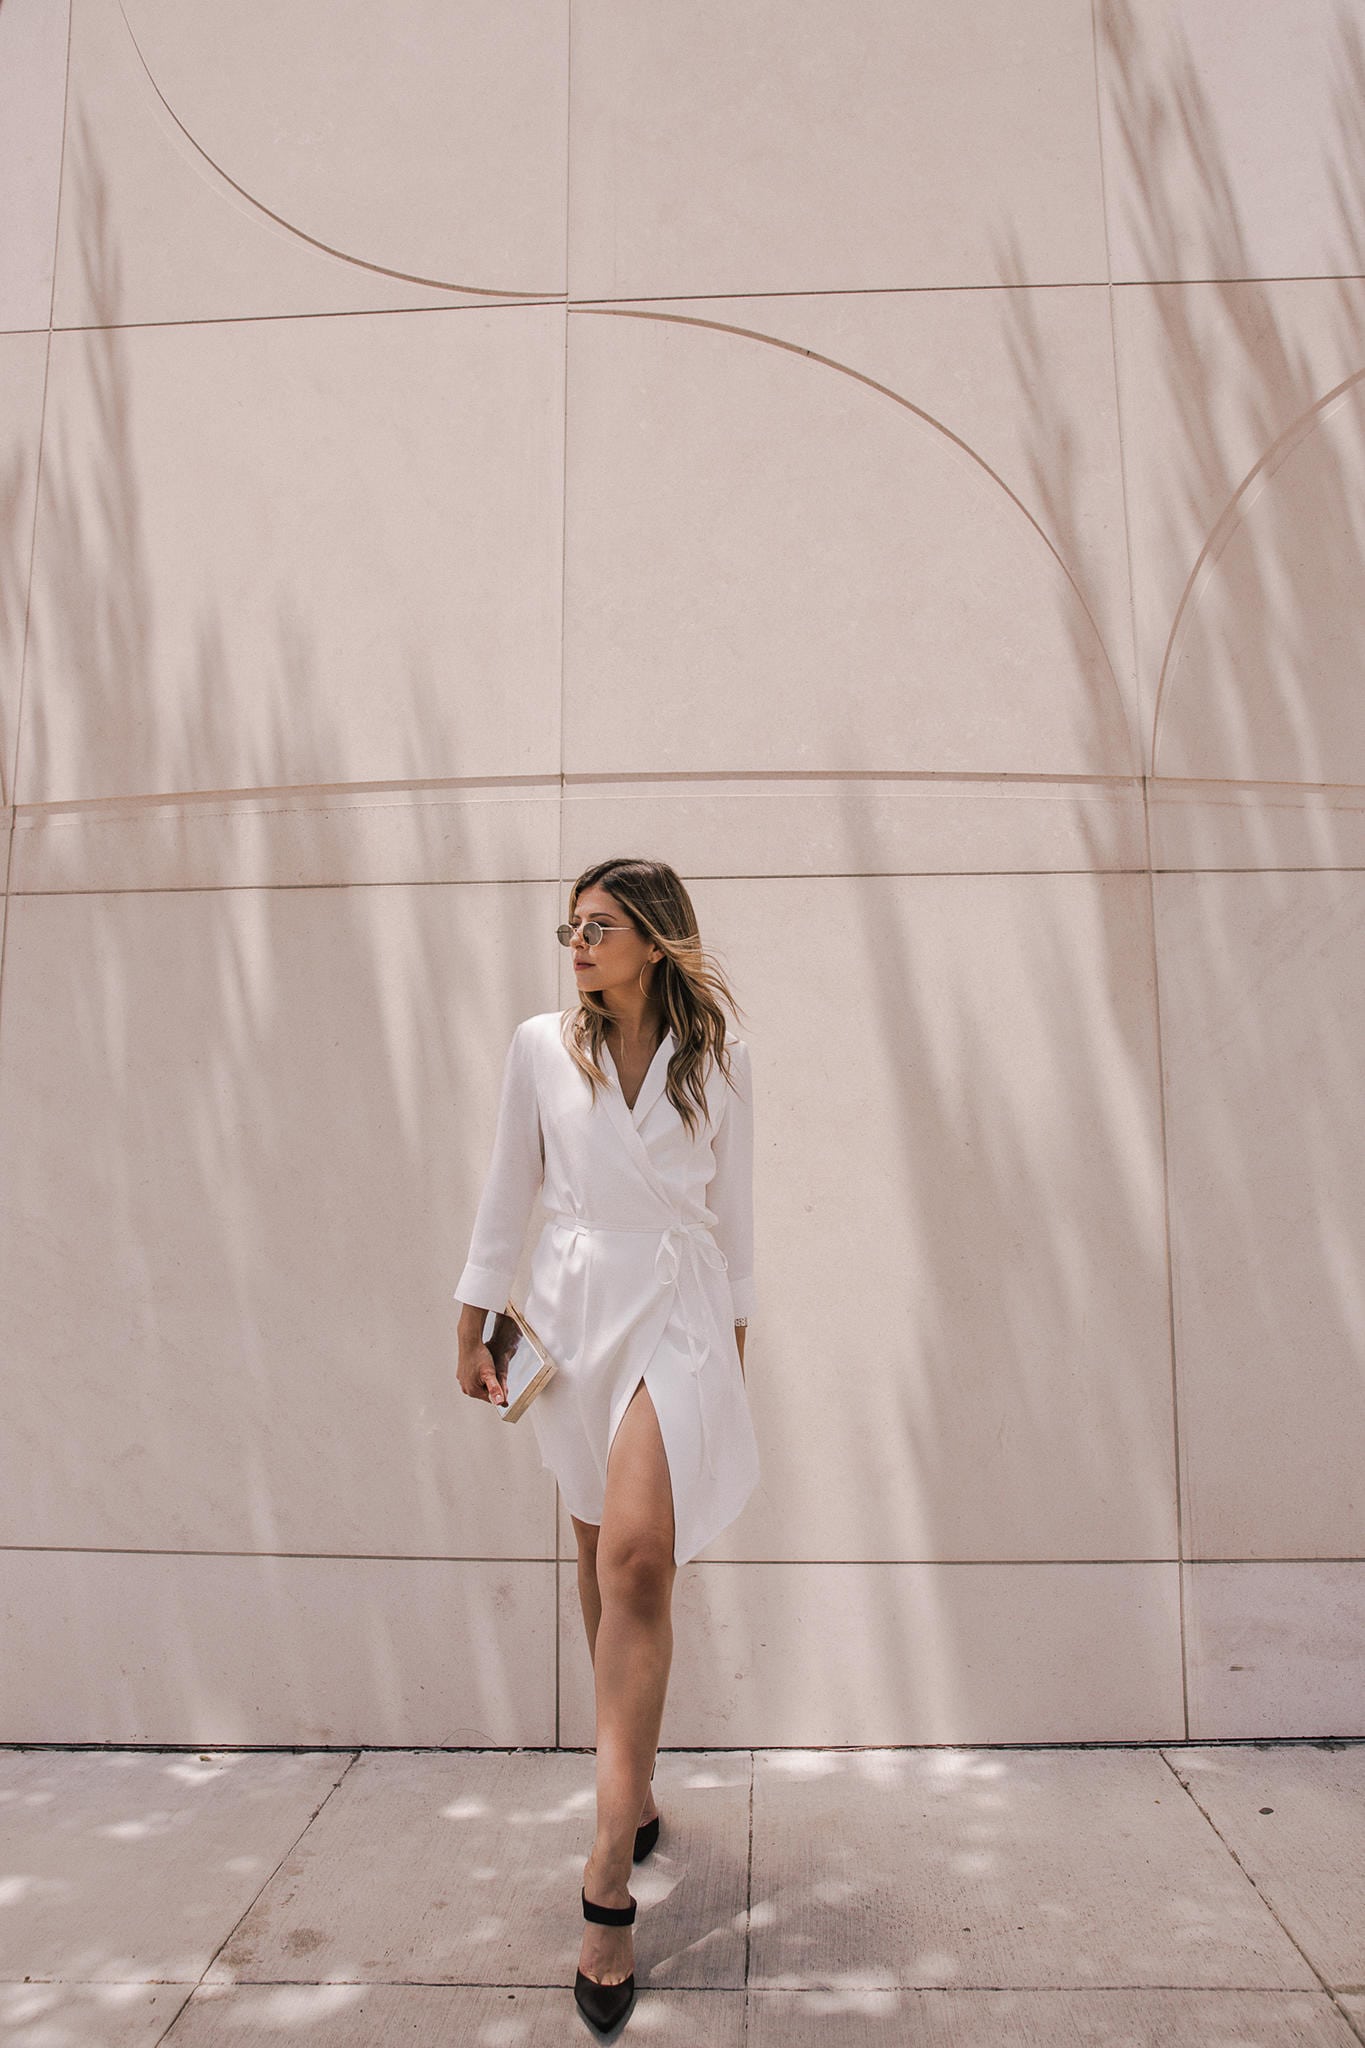 3 Classic Shoes Every Girl Should Own by Pam Hetlinger | TheGirlFromPanama.com | Pointed Toe Mules, Stuart Weitzman Mules, Summer 2018 shoes, white dress, summer dress, summer style, la fashion blogger